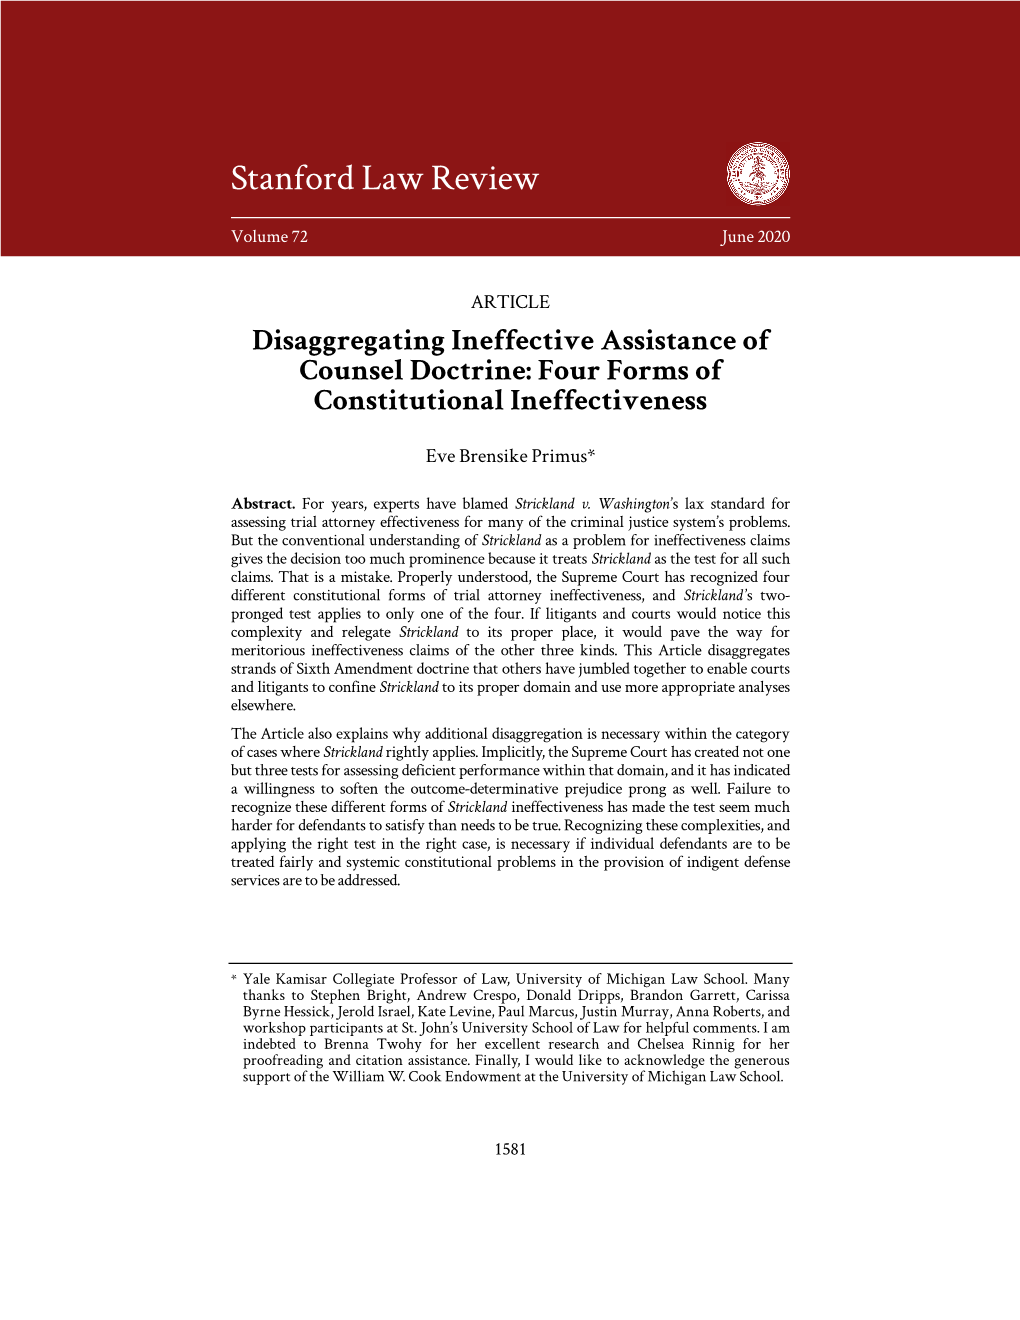 Disaggregating Ineffective Assistance of Counsel Doctrine: Four Forms of Constitutional Ineffectiveness